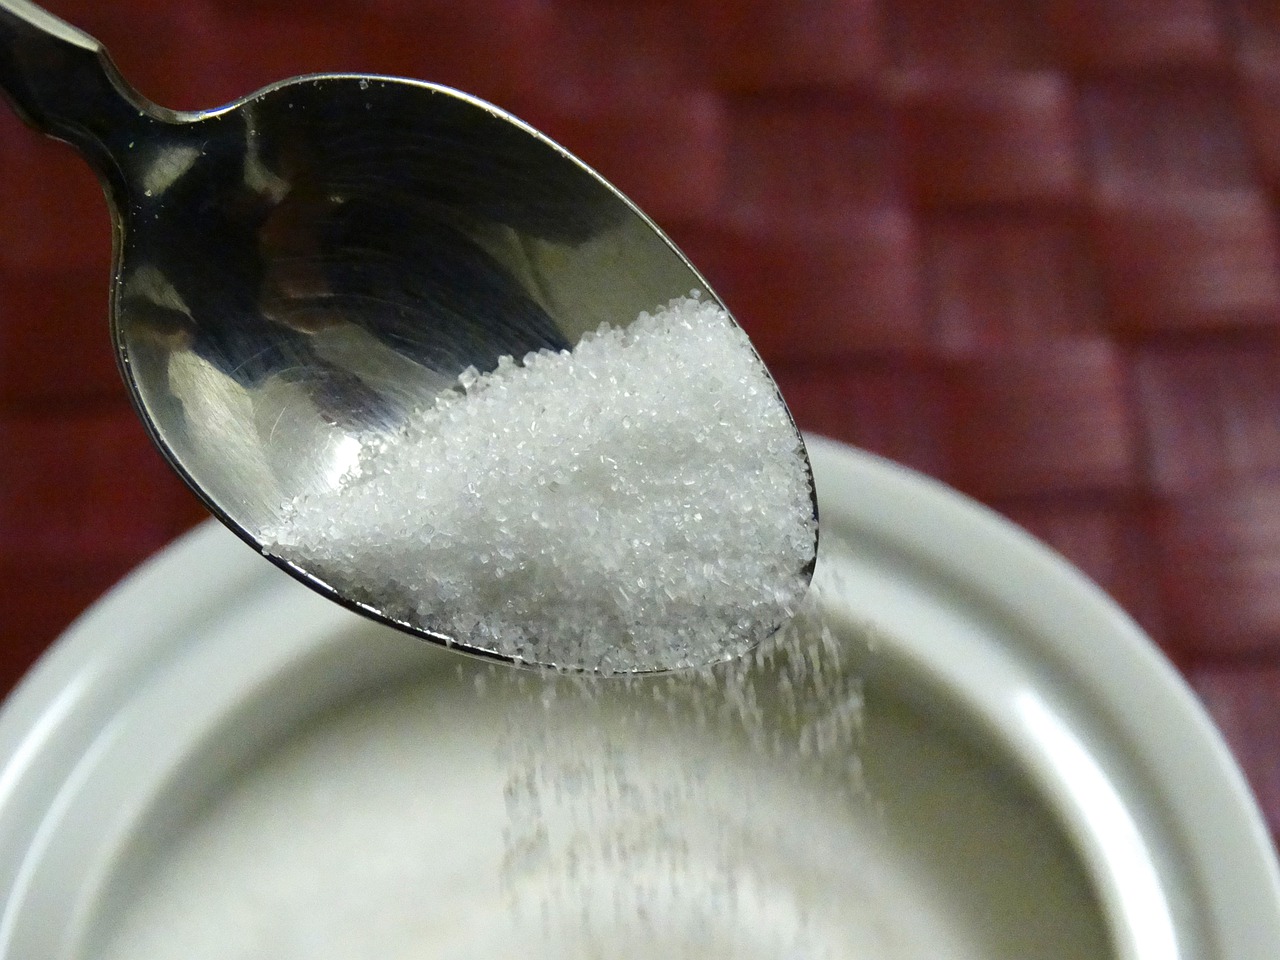 A spoon with white sugar on it